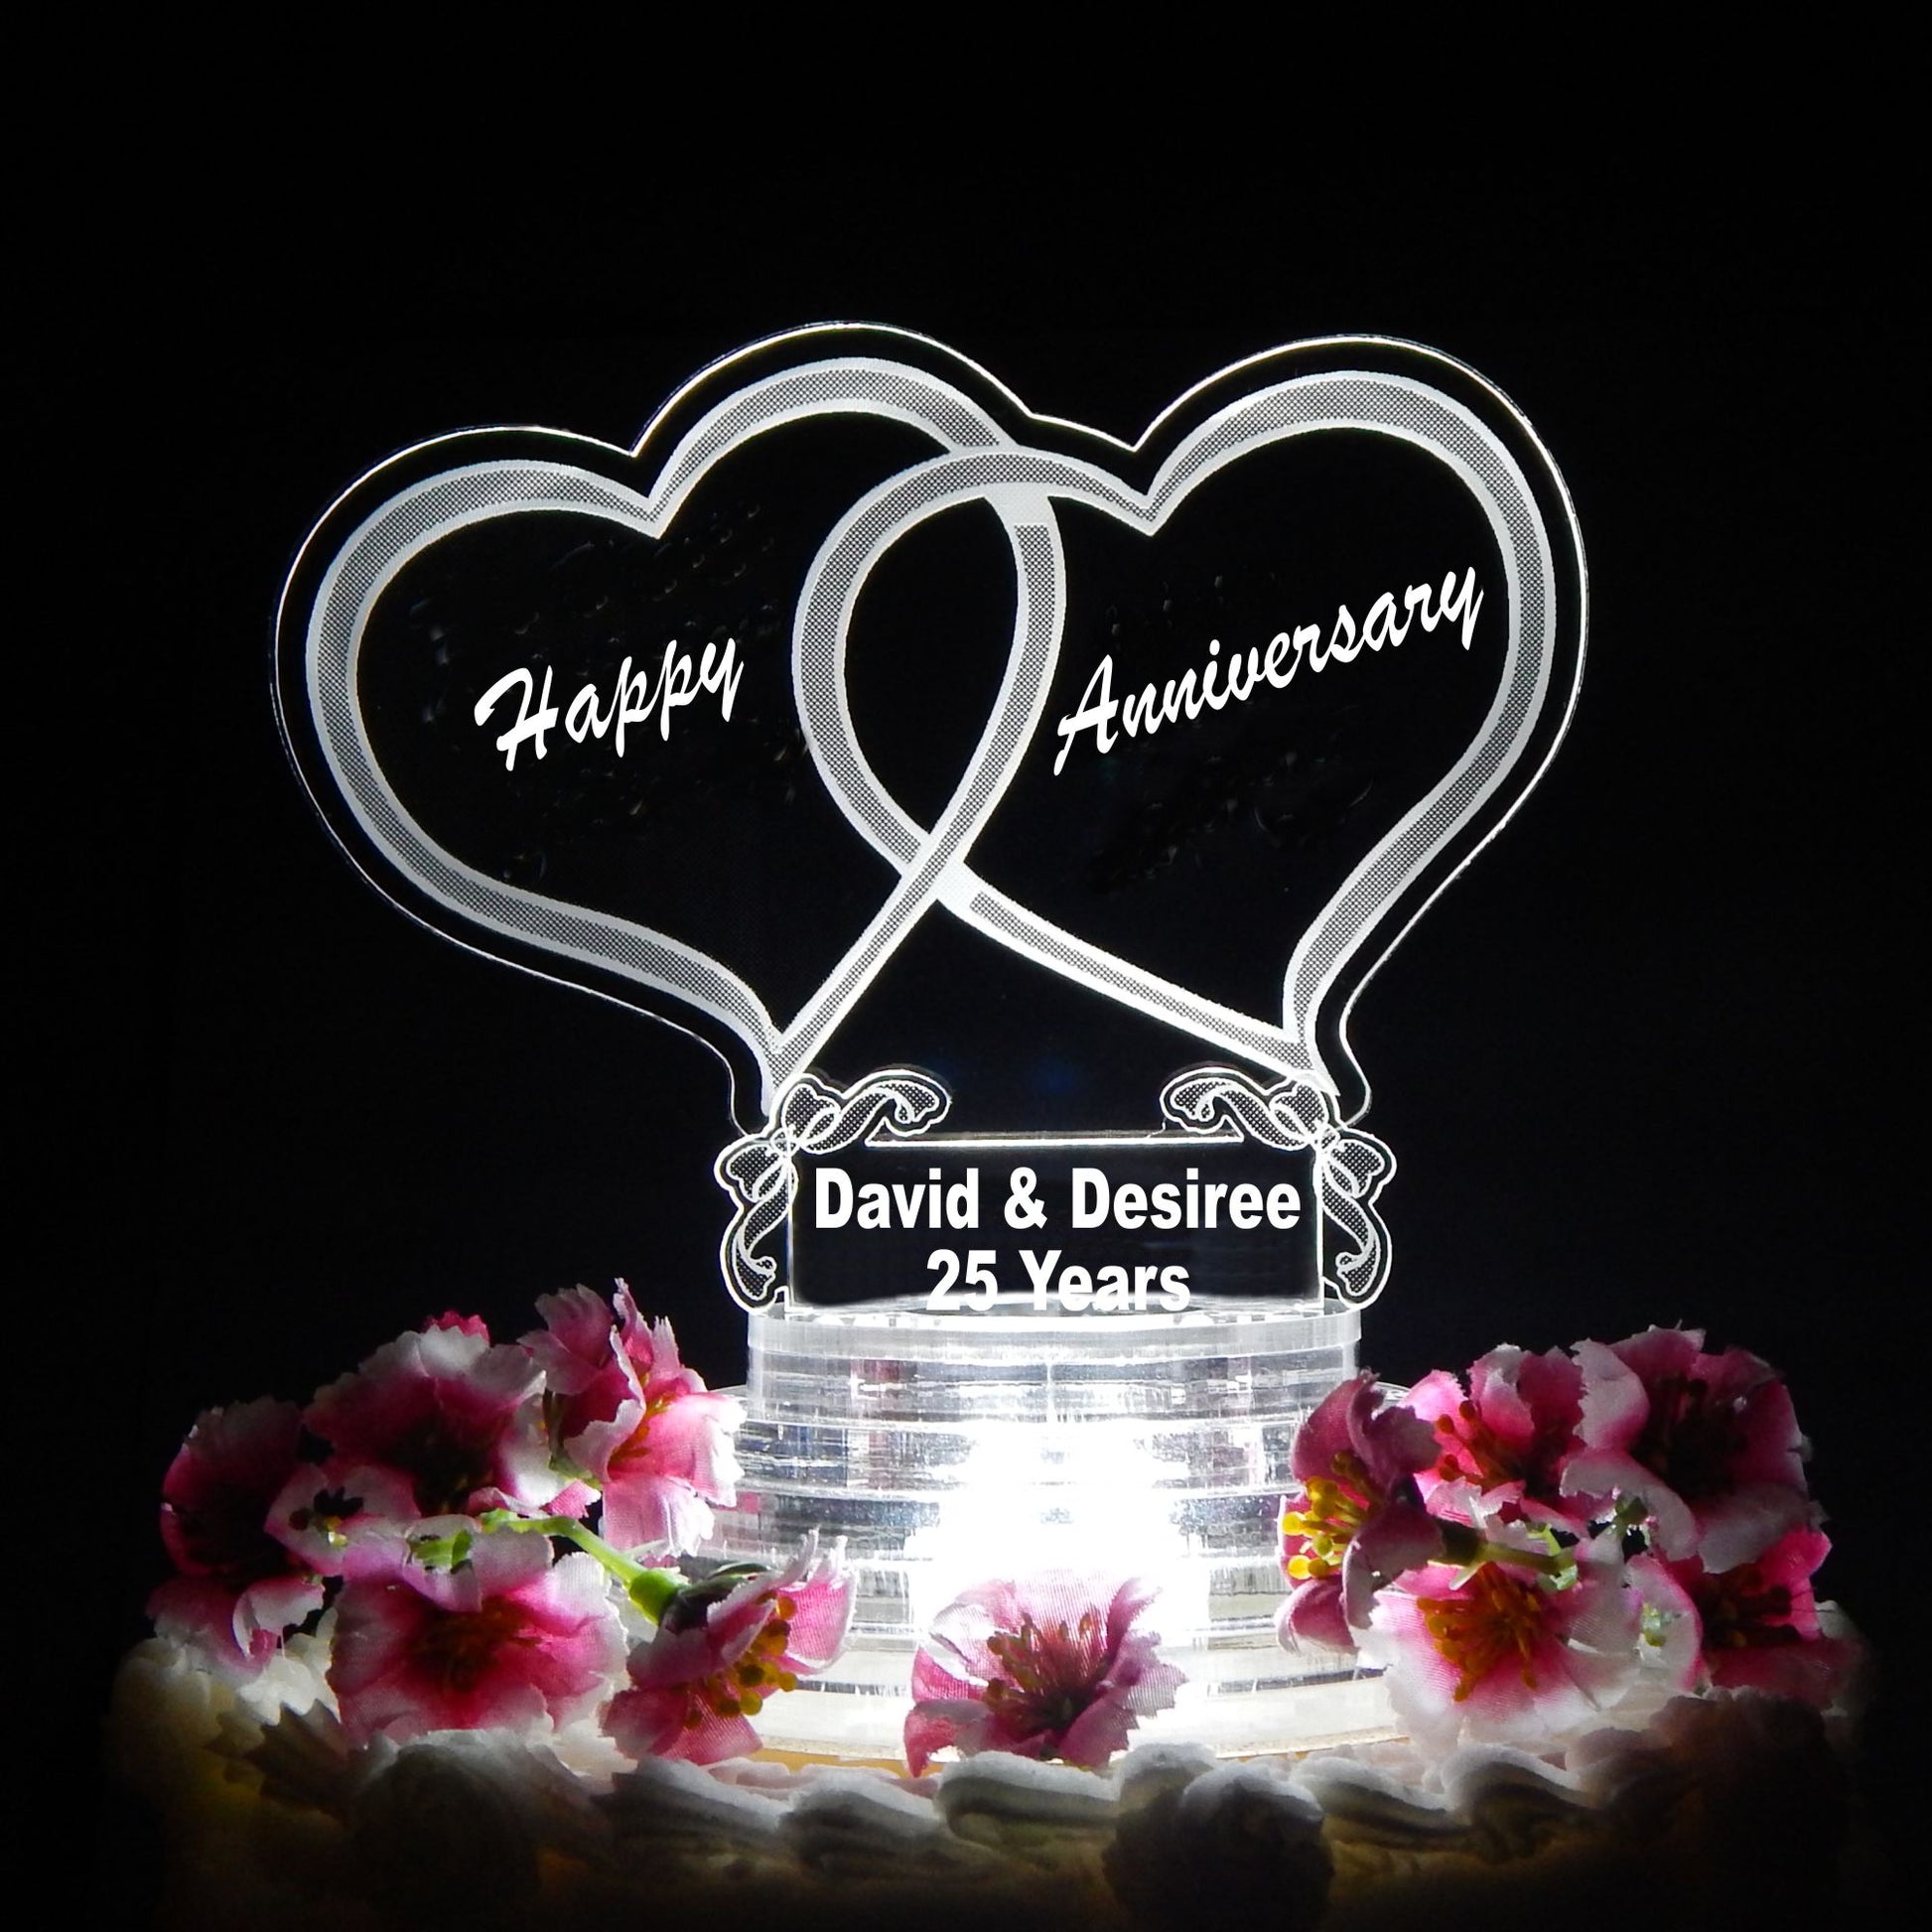 clear acrylic cake topper designed with two hearts with Happy Anniversary engraved inside the hearts, along with names and number of years for anniversary